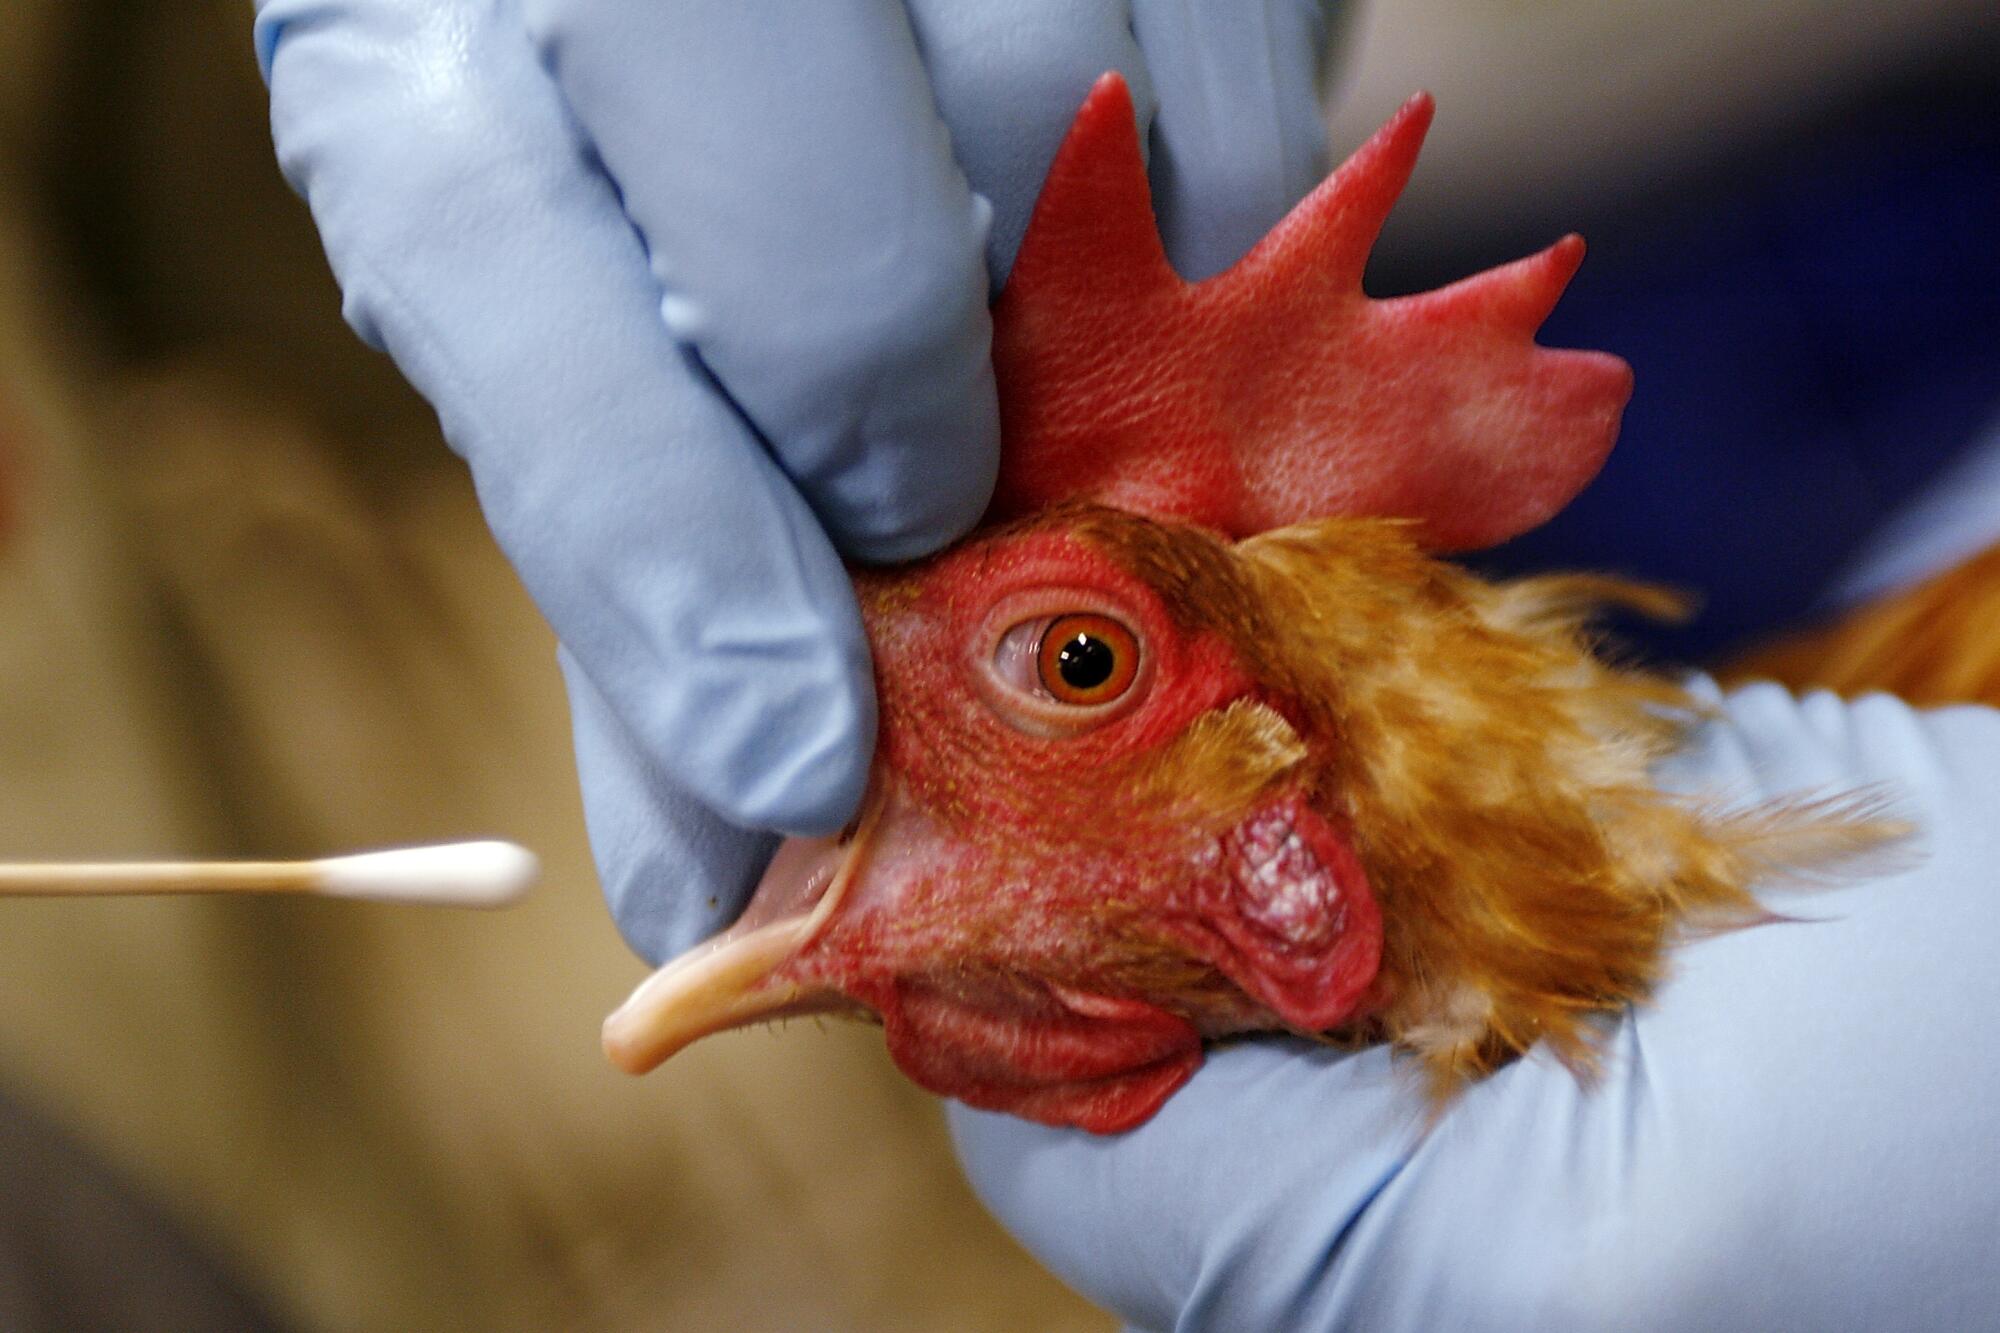 A veterinary technician places a cotton swab inside the beak of a rooster.